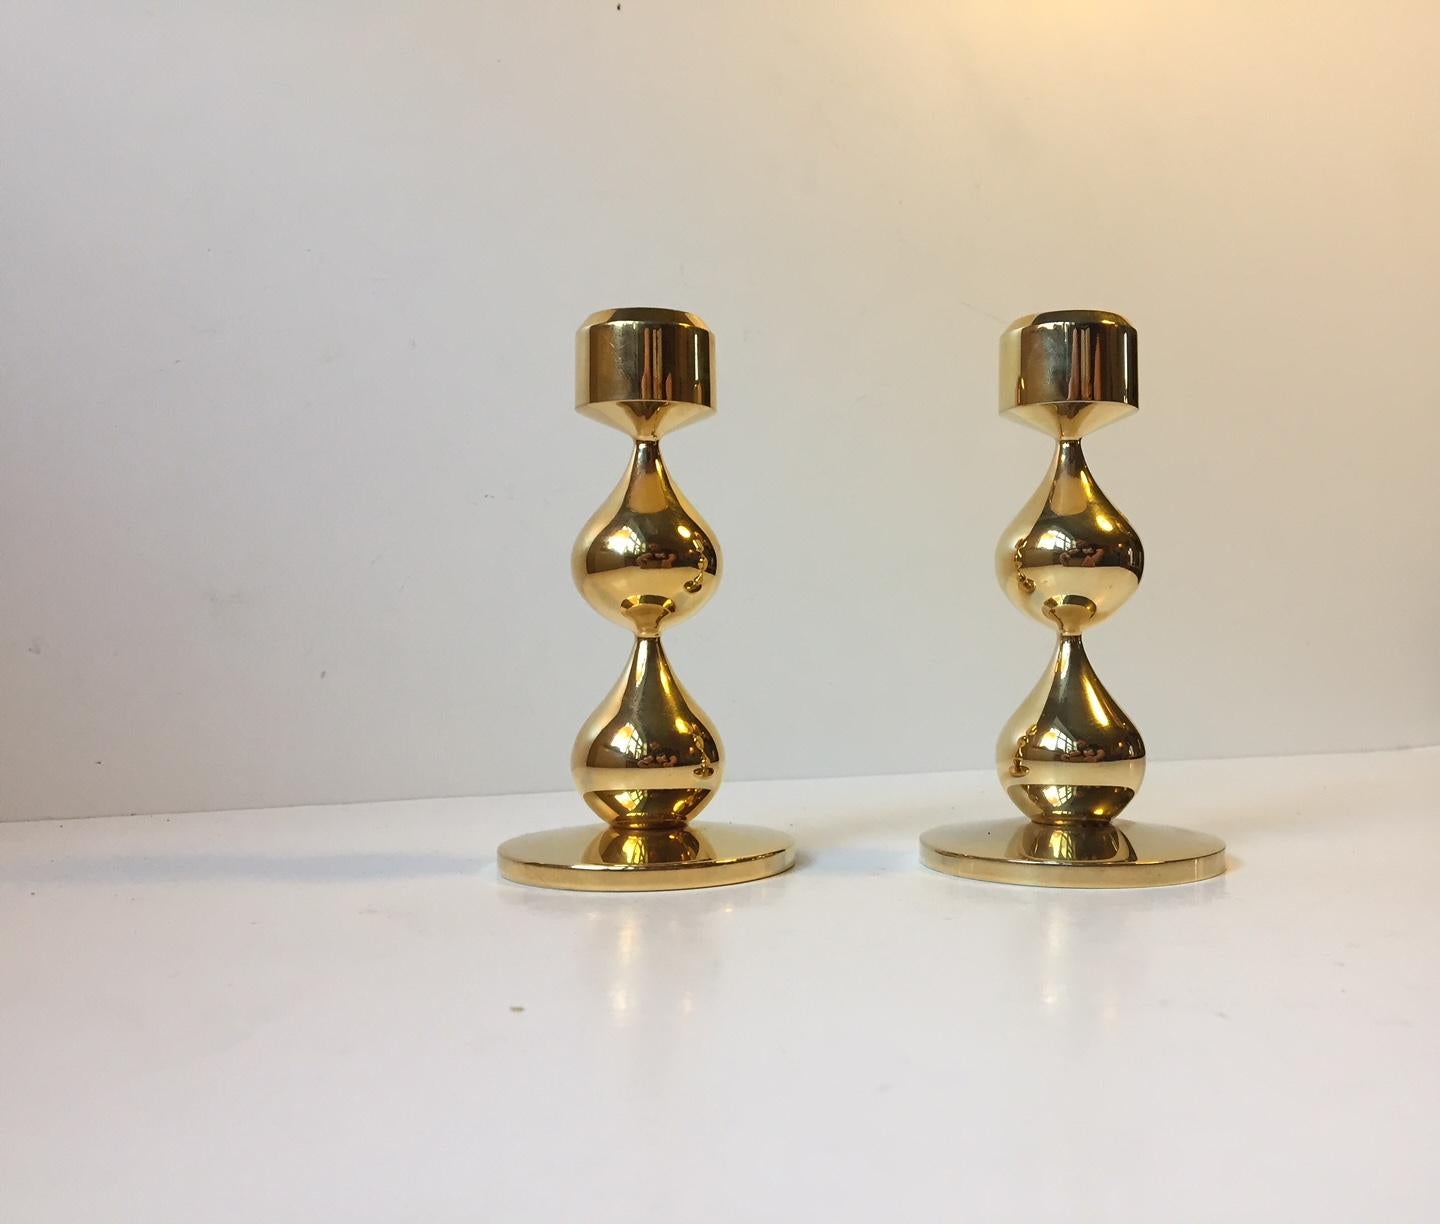 This set of organically-teardrop shaped 24-carat gold-plated candleholders was designed by Hugo Asmussen. The pieces were manufactured by Asmussen in Denmark in the 1960s. Candle size: regular.